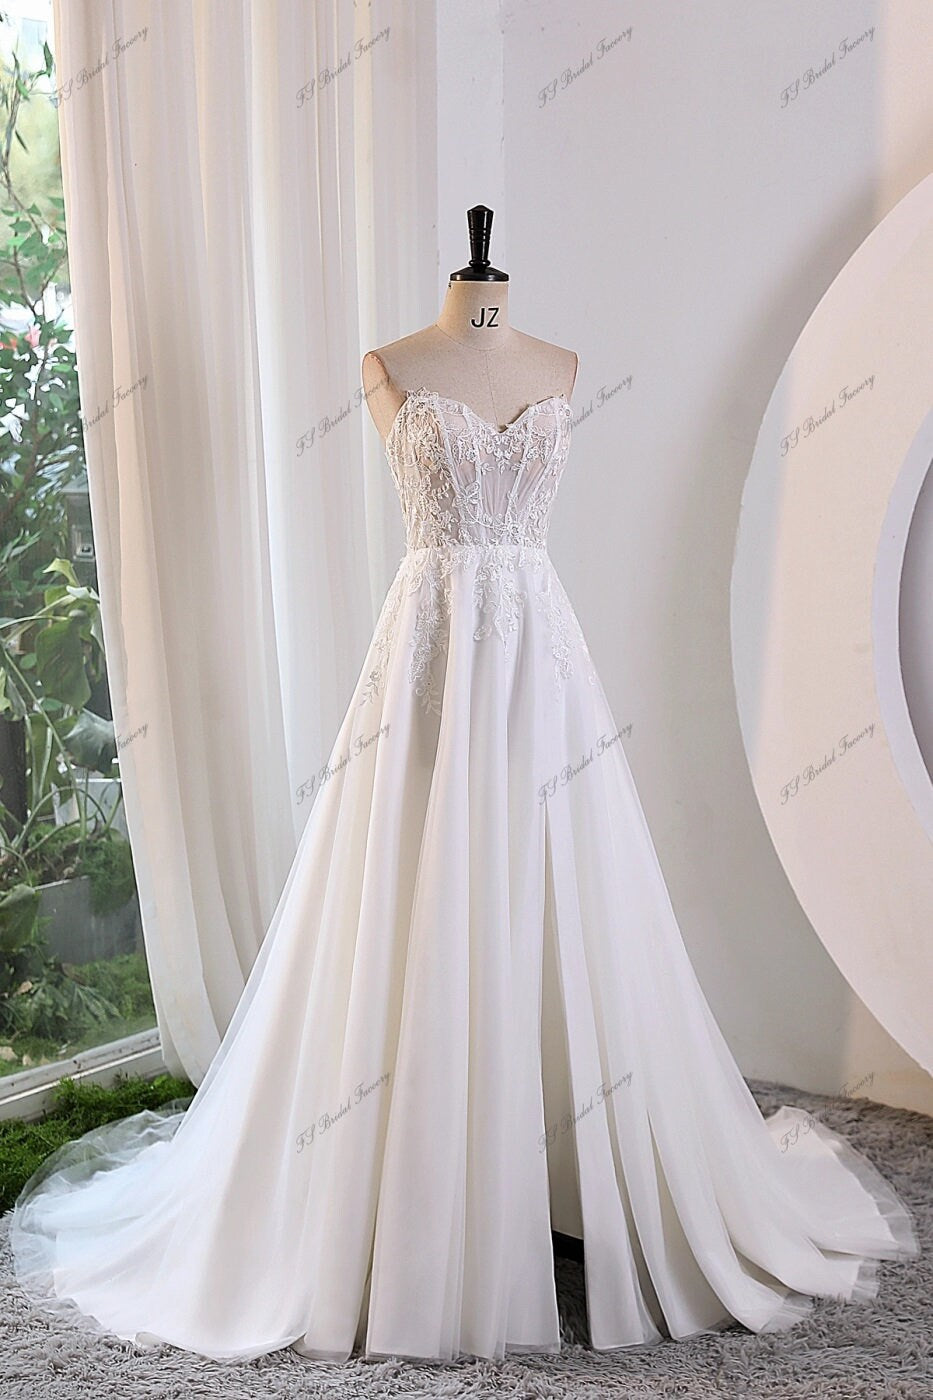 A-line Wedding Gown With Sweetheart Neckline And High Side Split Sleeveless Bridal Gown Strapless Backless Design